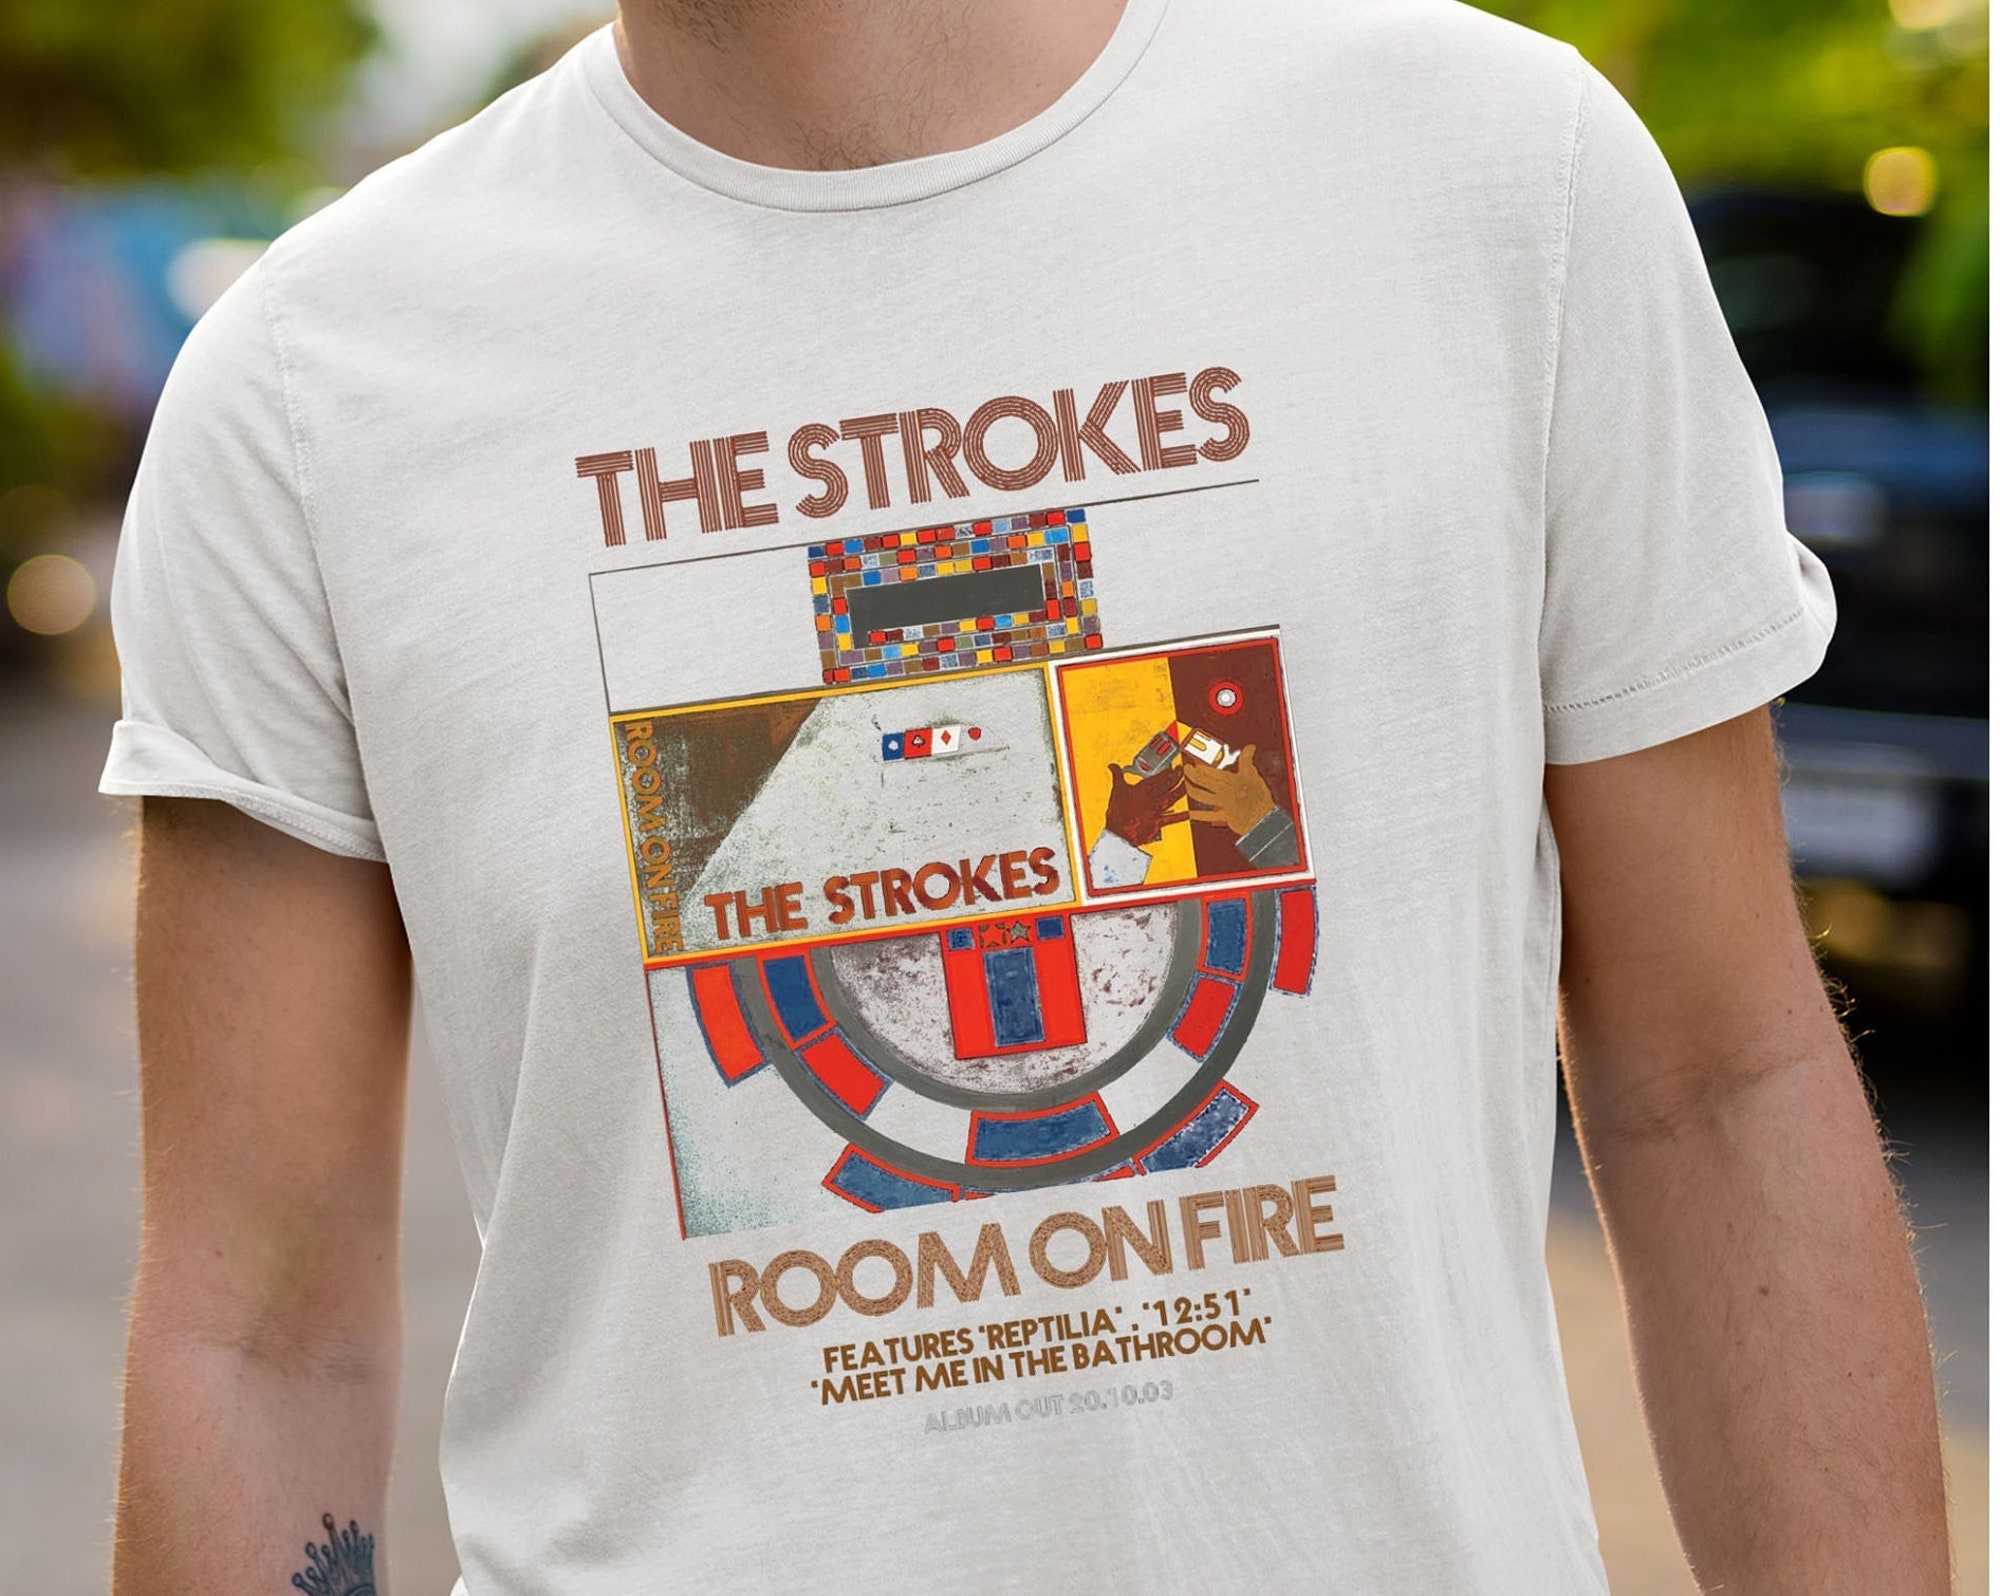 The Strokes Shirt, room on fire Reptilia, The Strokes Vintage Shirt